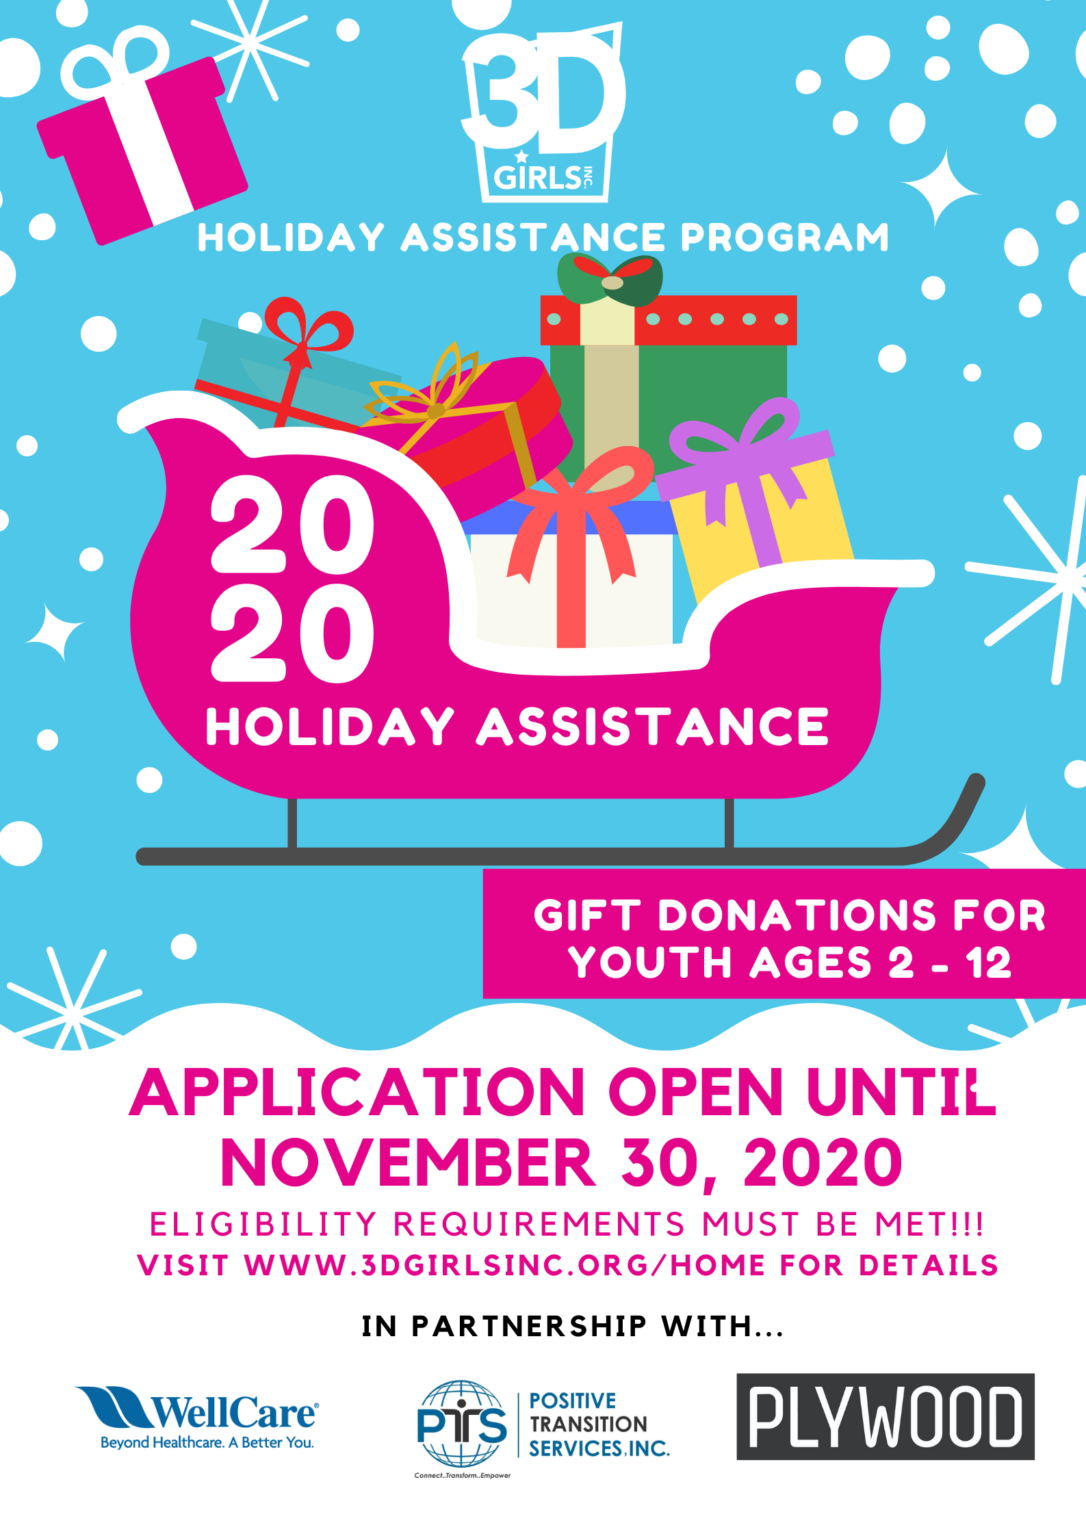 Holiday Assistance Application 3D Girls, Inc. Holiday Assistance